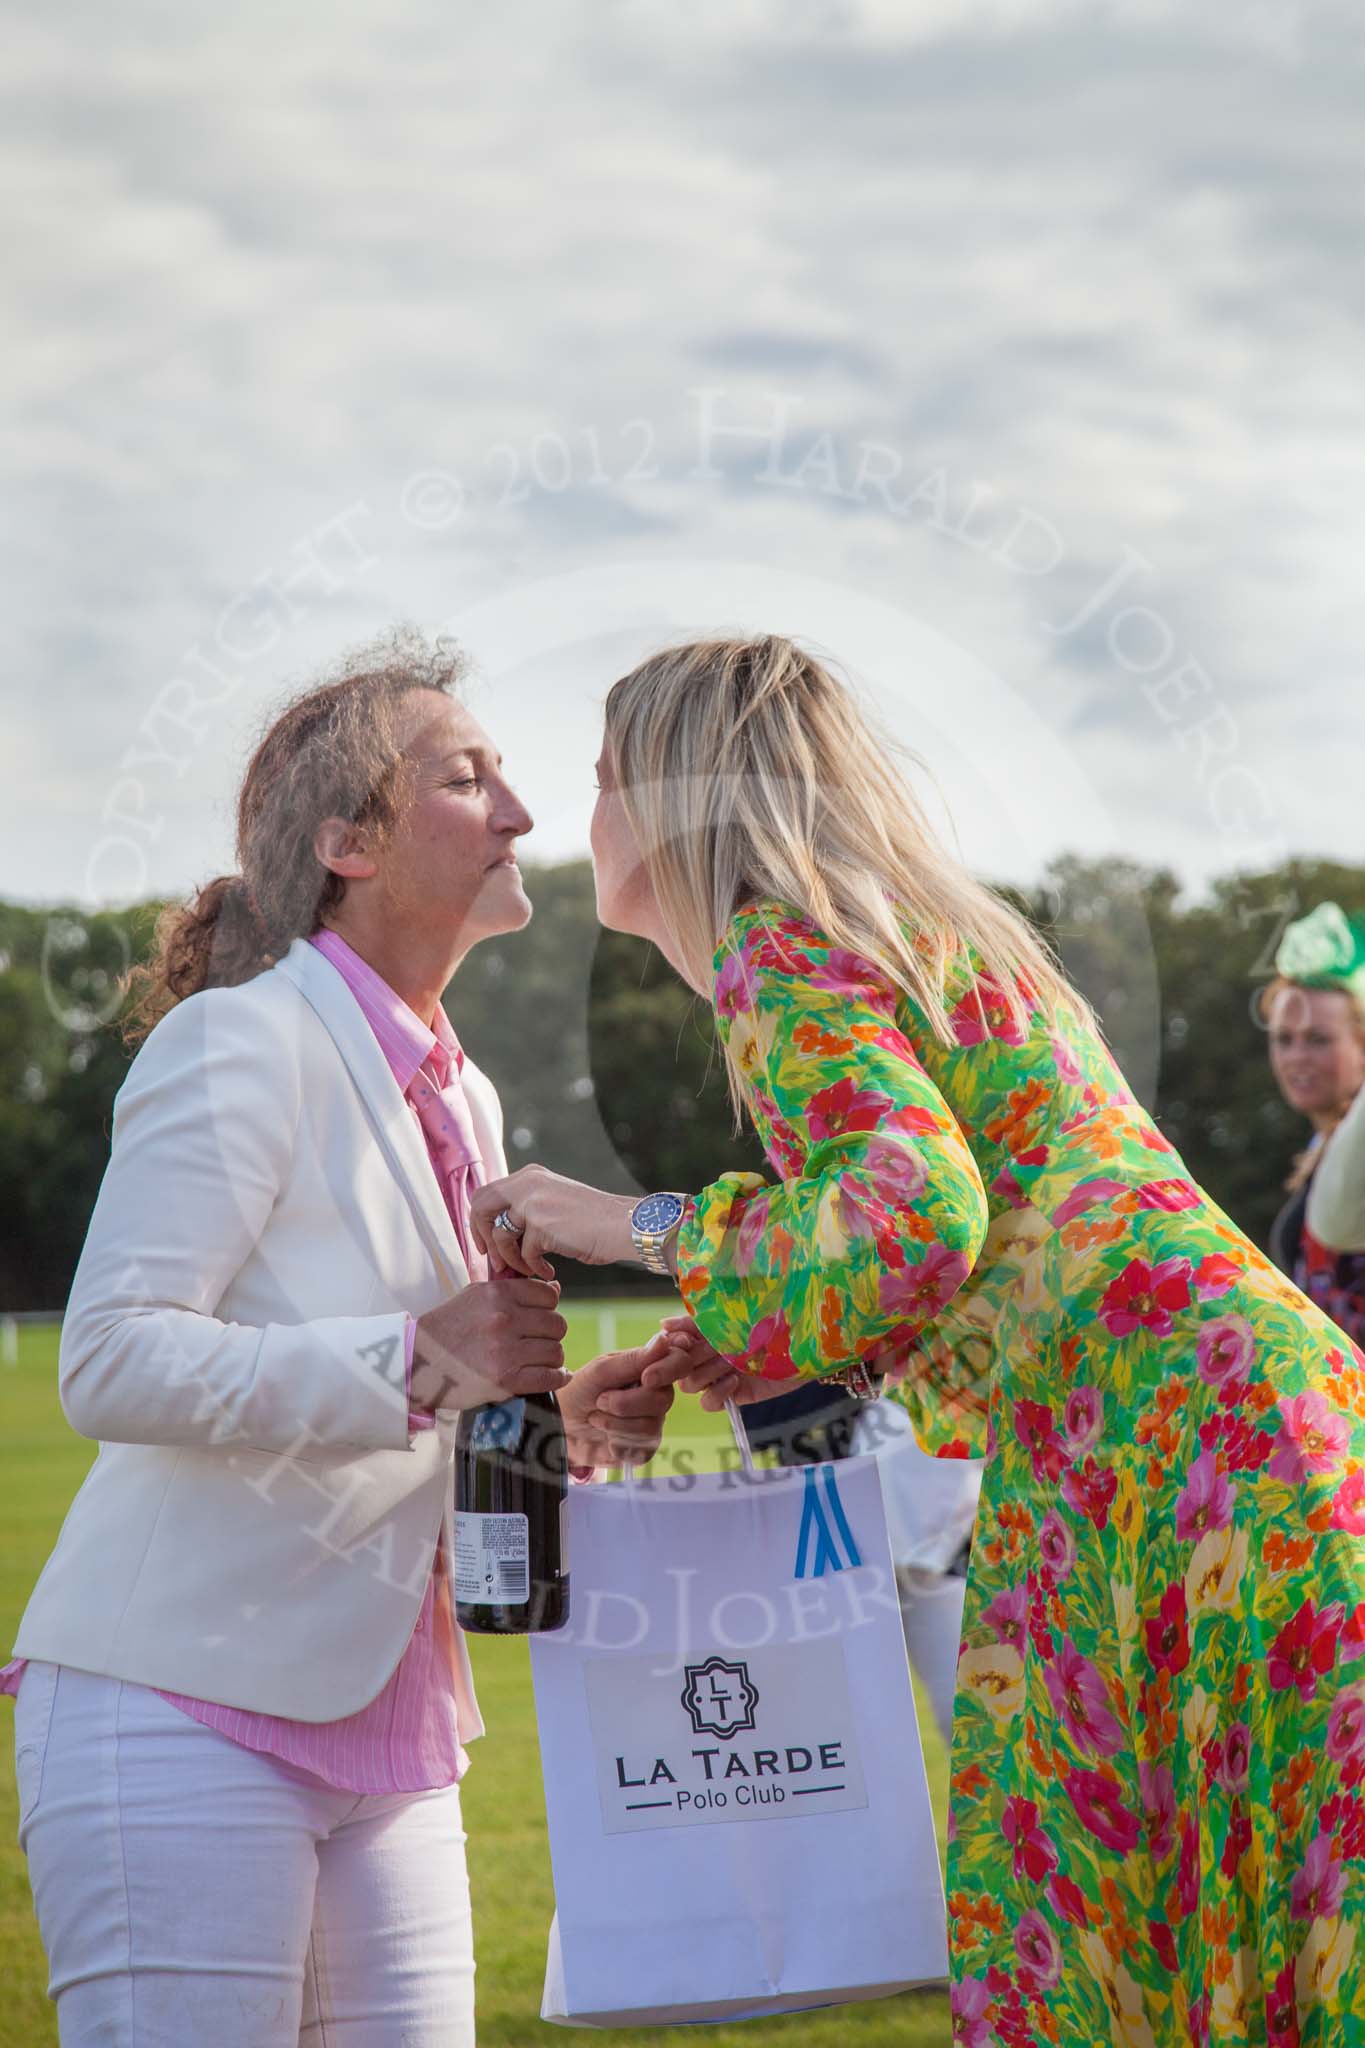 7th Heritage Polo Cup finals: Emerging Switzerland Sarah Krasker receiving La Tarde Polo Club Prizes with Clare Cotton of 'Cotton & Gems'..
Hurtwood Park Polo Club,
Ewhurst Green,
Surrey,
United Kingdom,
on 05 August 2012 at 17:06, image #272